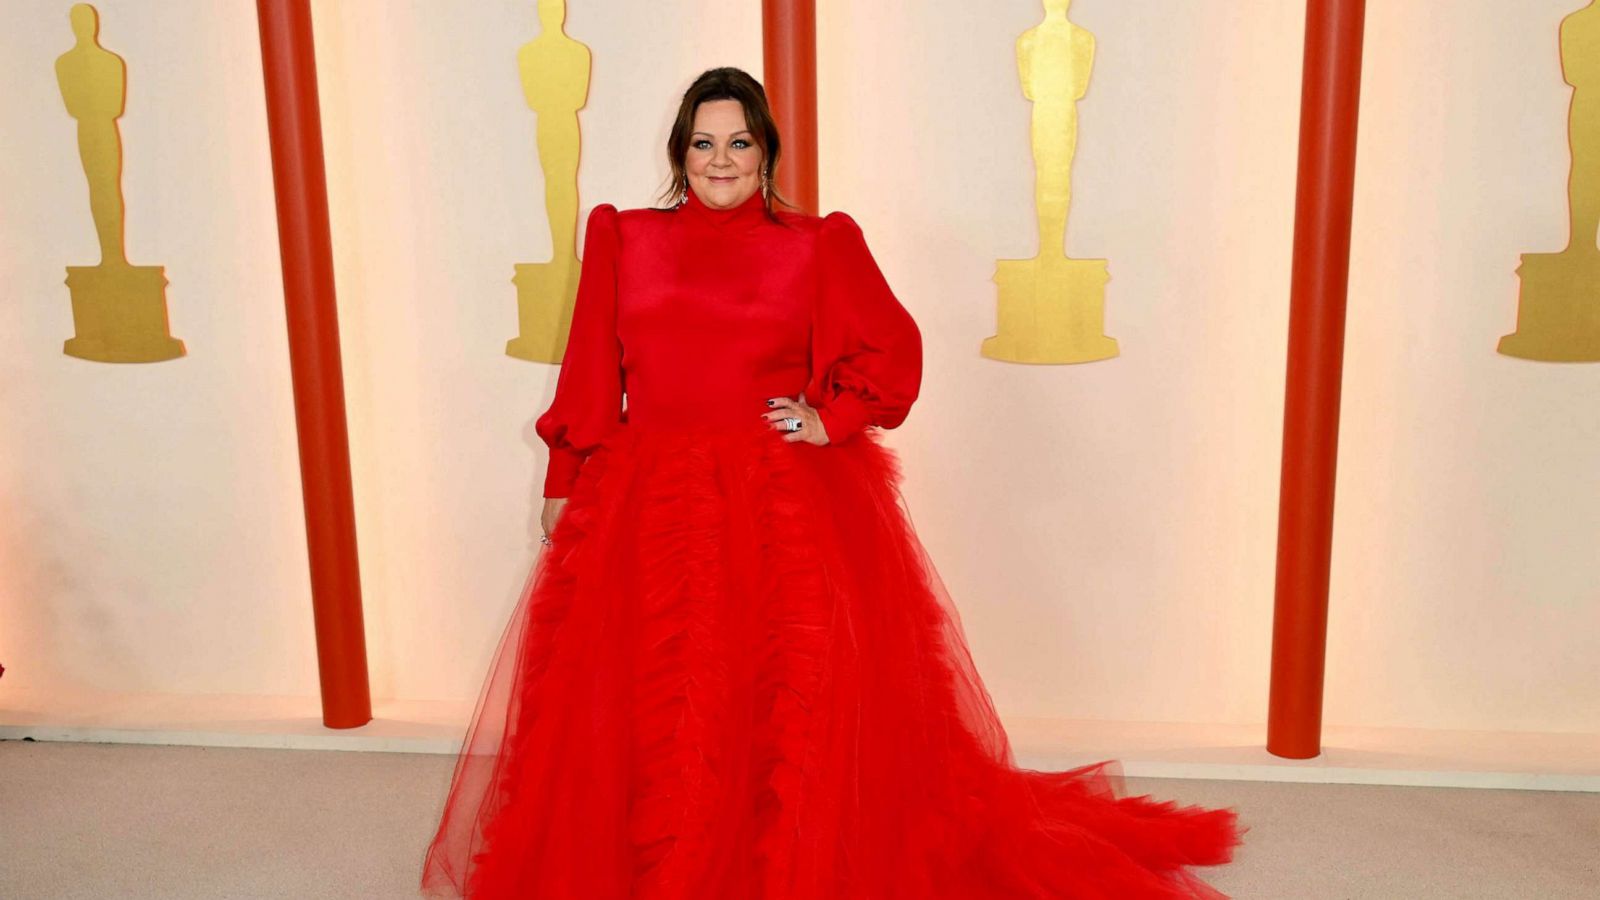 Louis Vuitton and Christian Siriano Go Eco-Friendly at the Oscars